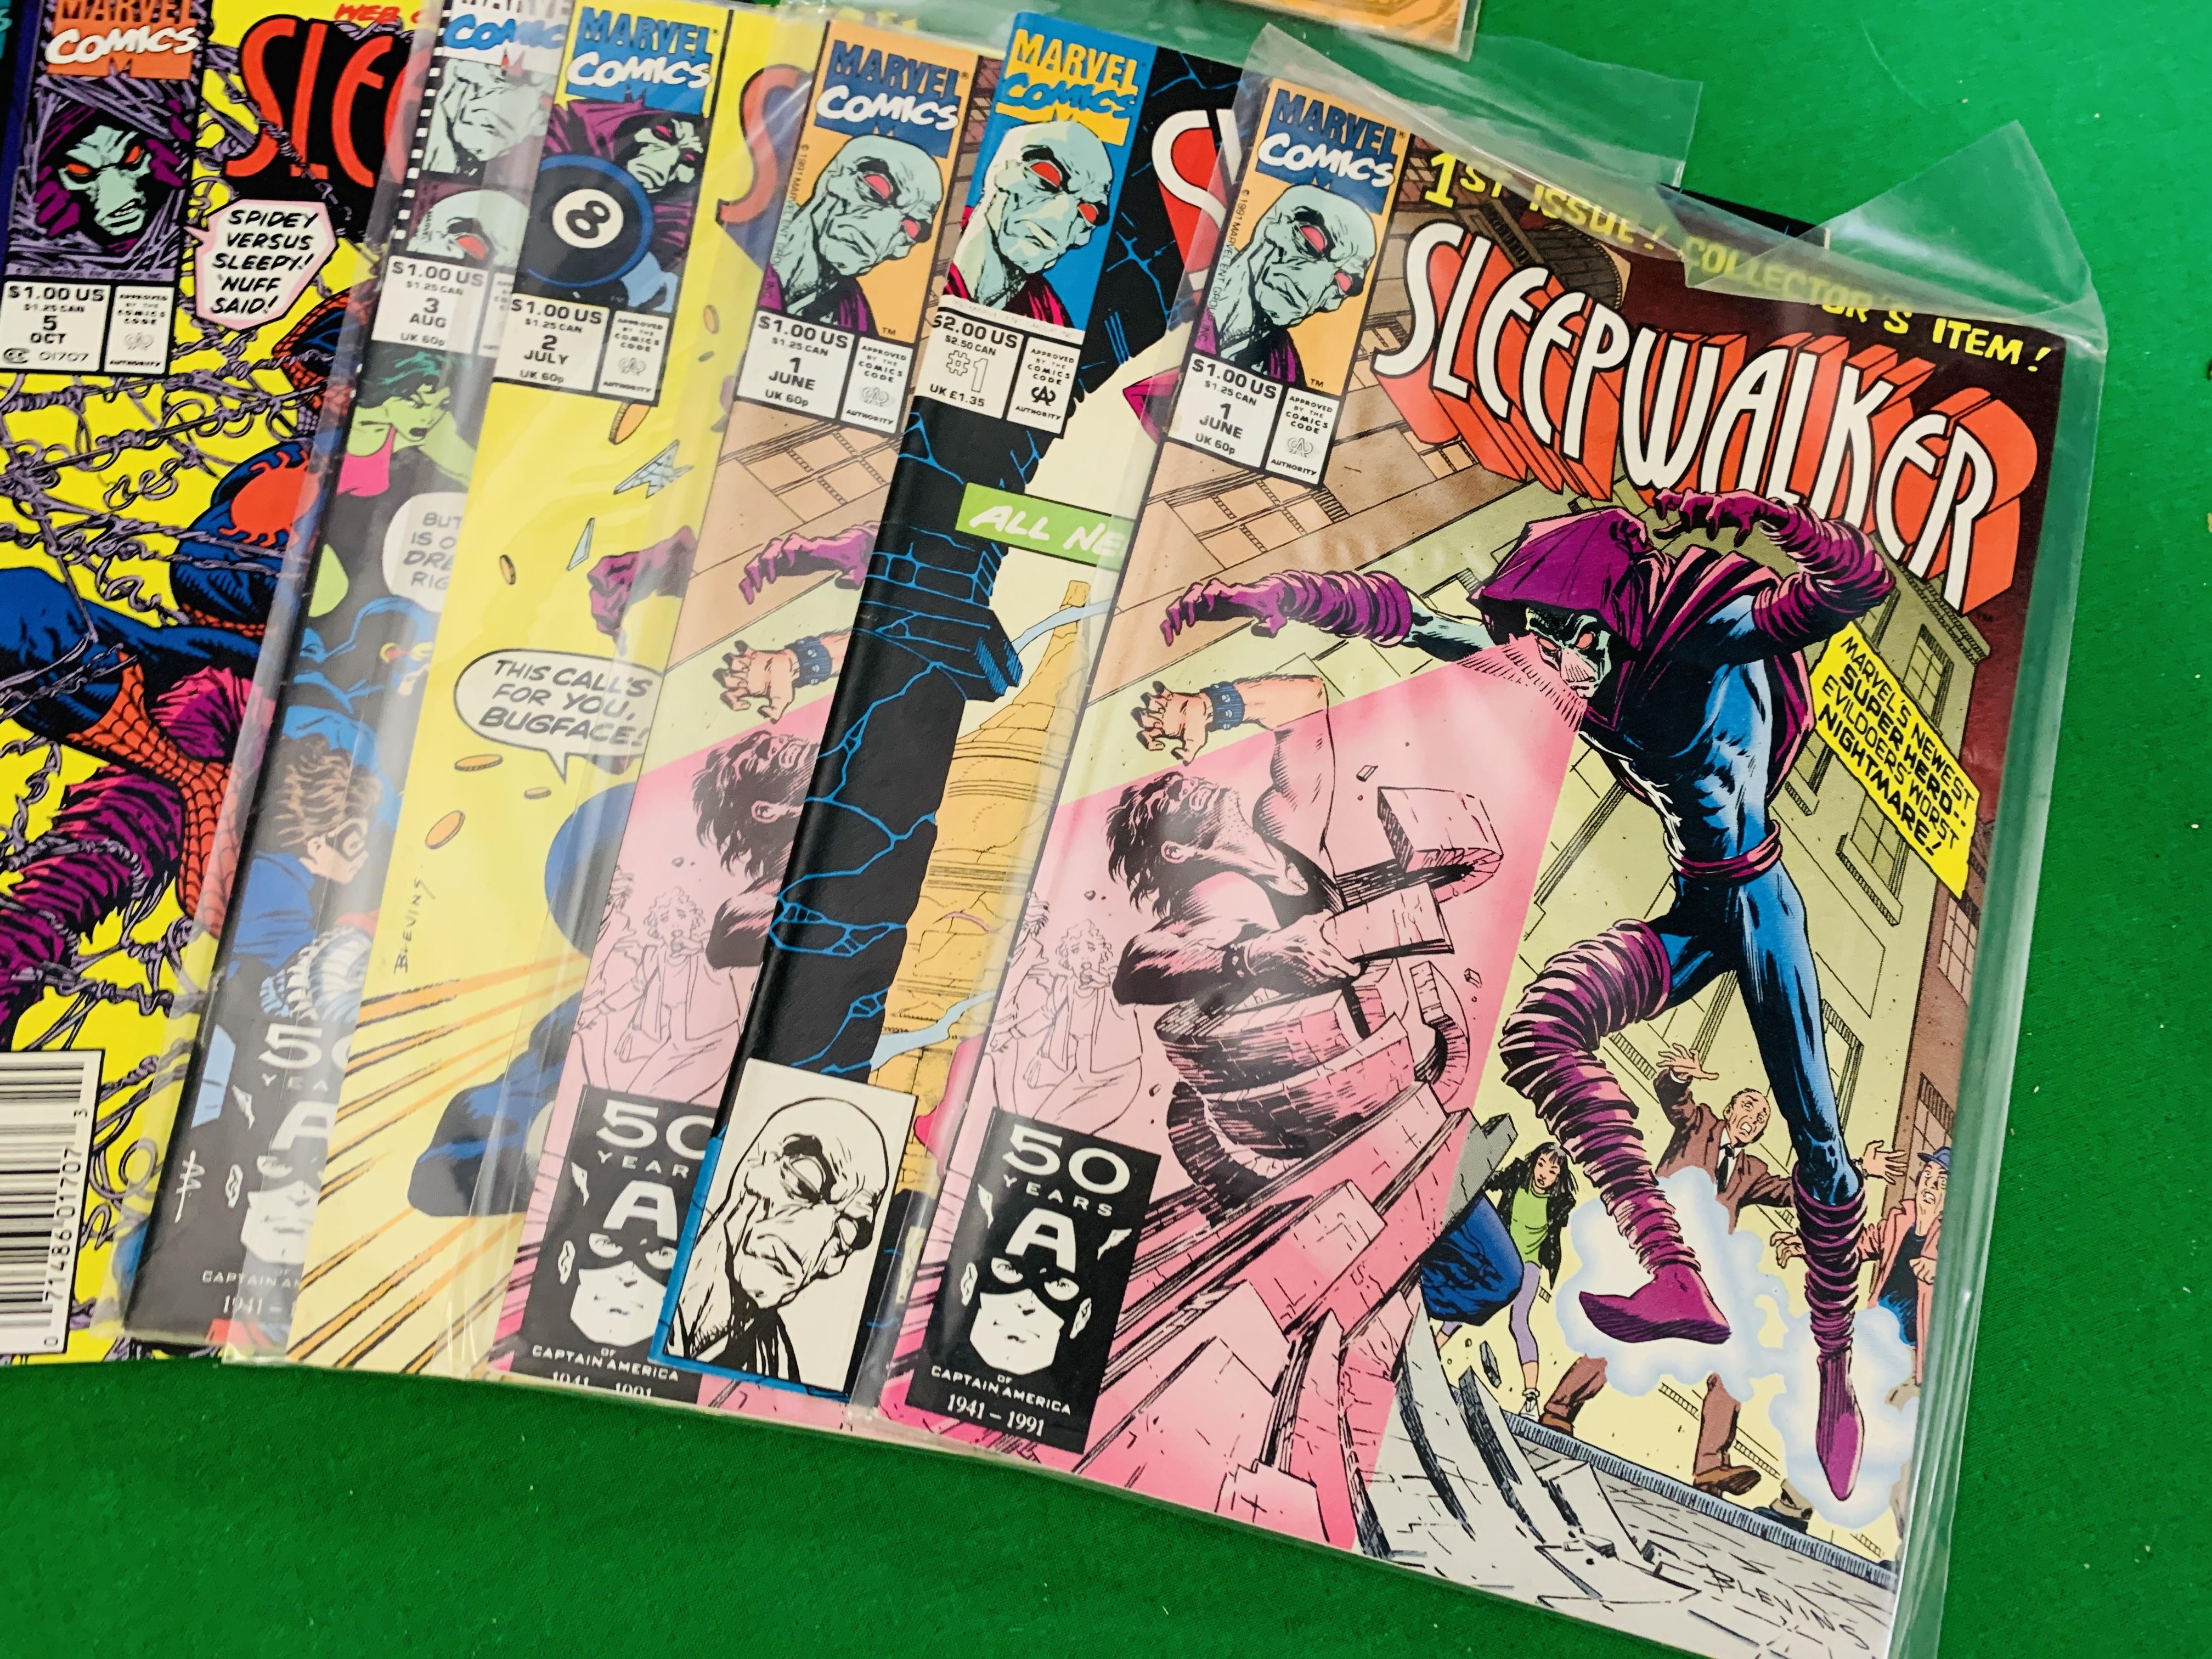 MARVEL COMICS SLEEPWALKER NO. 1 - 33 FROM 1991, FIRST APPEARANCE NO. - Image 2 of 7